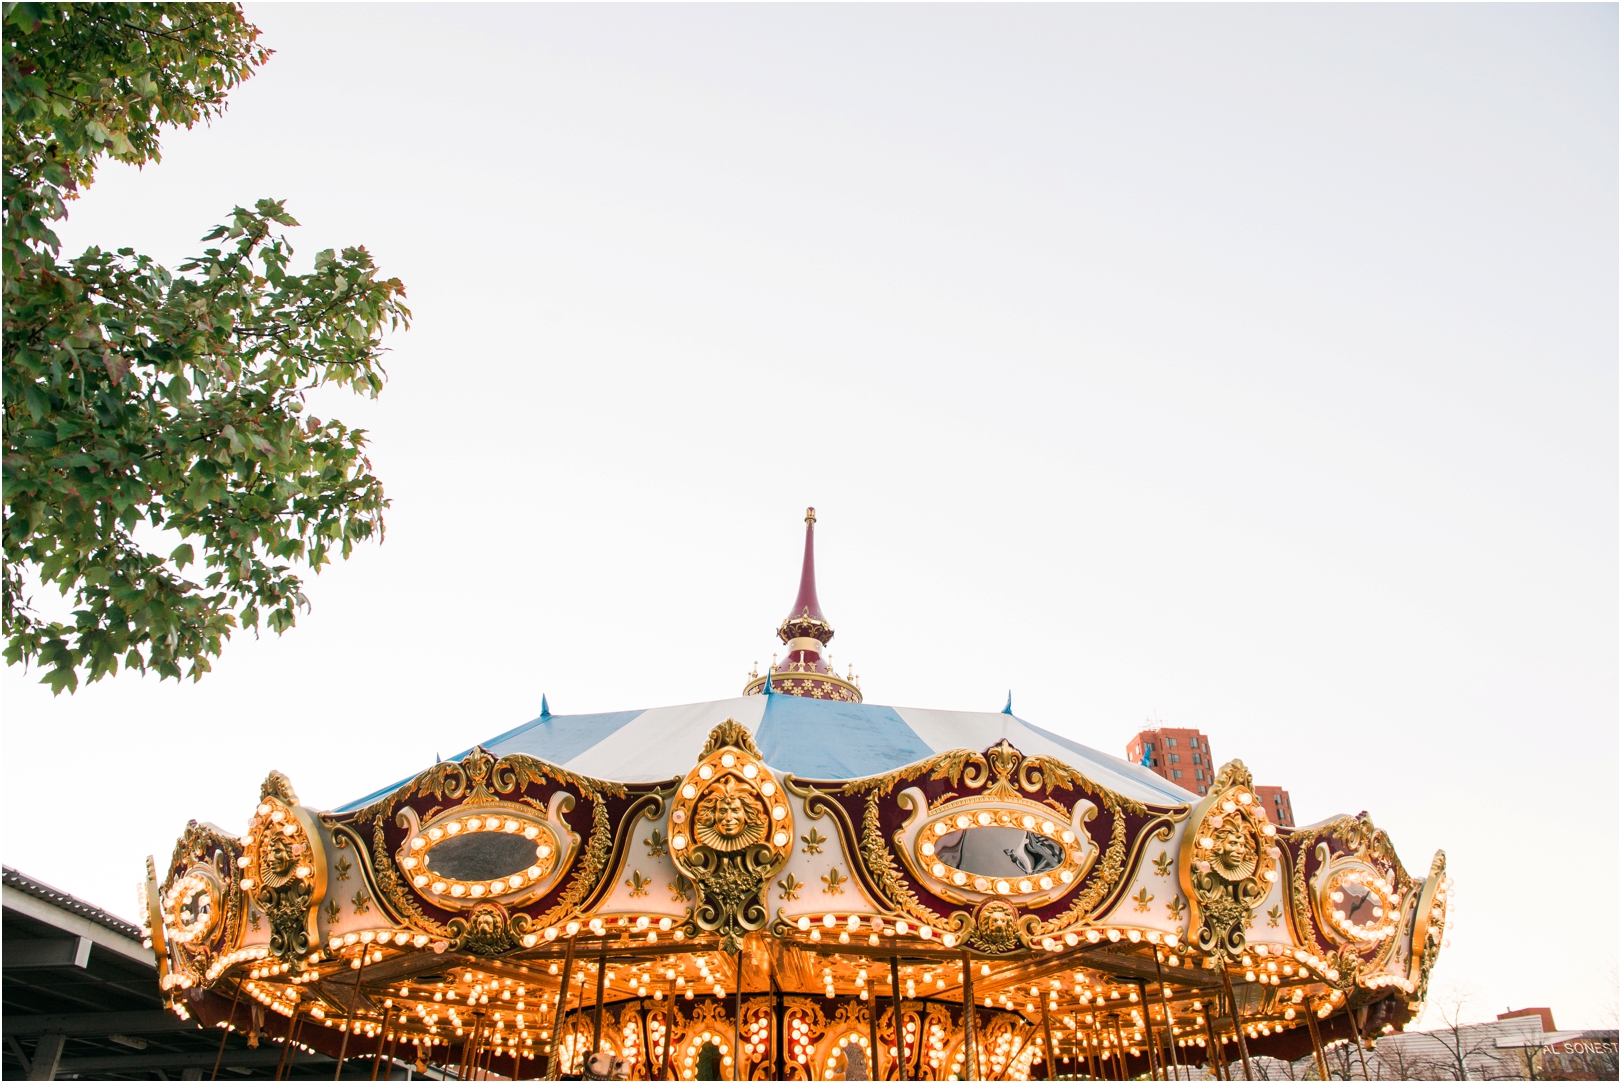 engagement session on a carousel